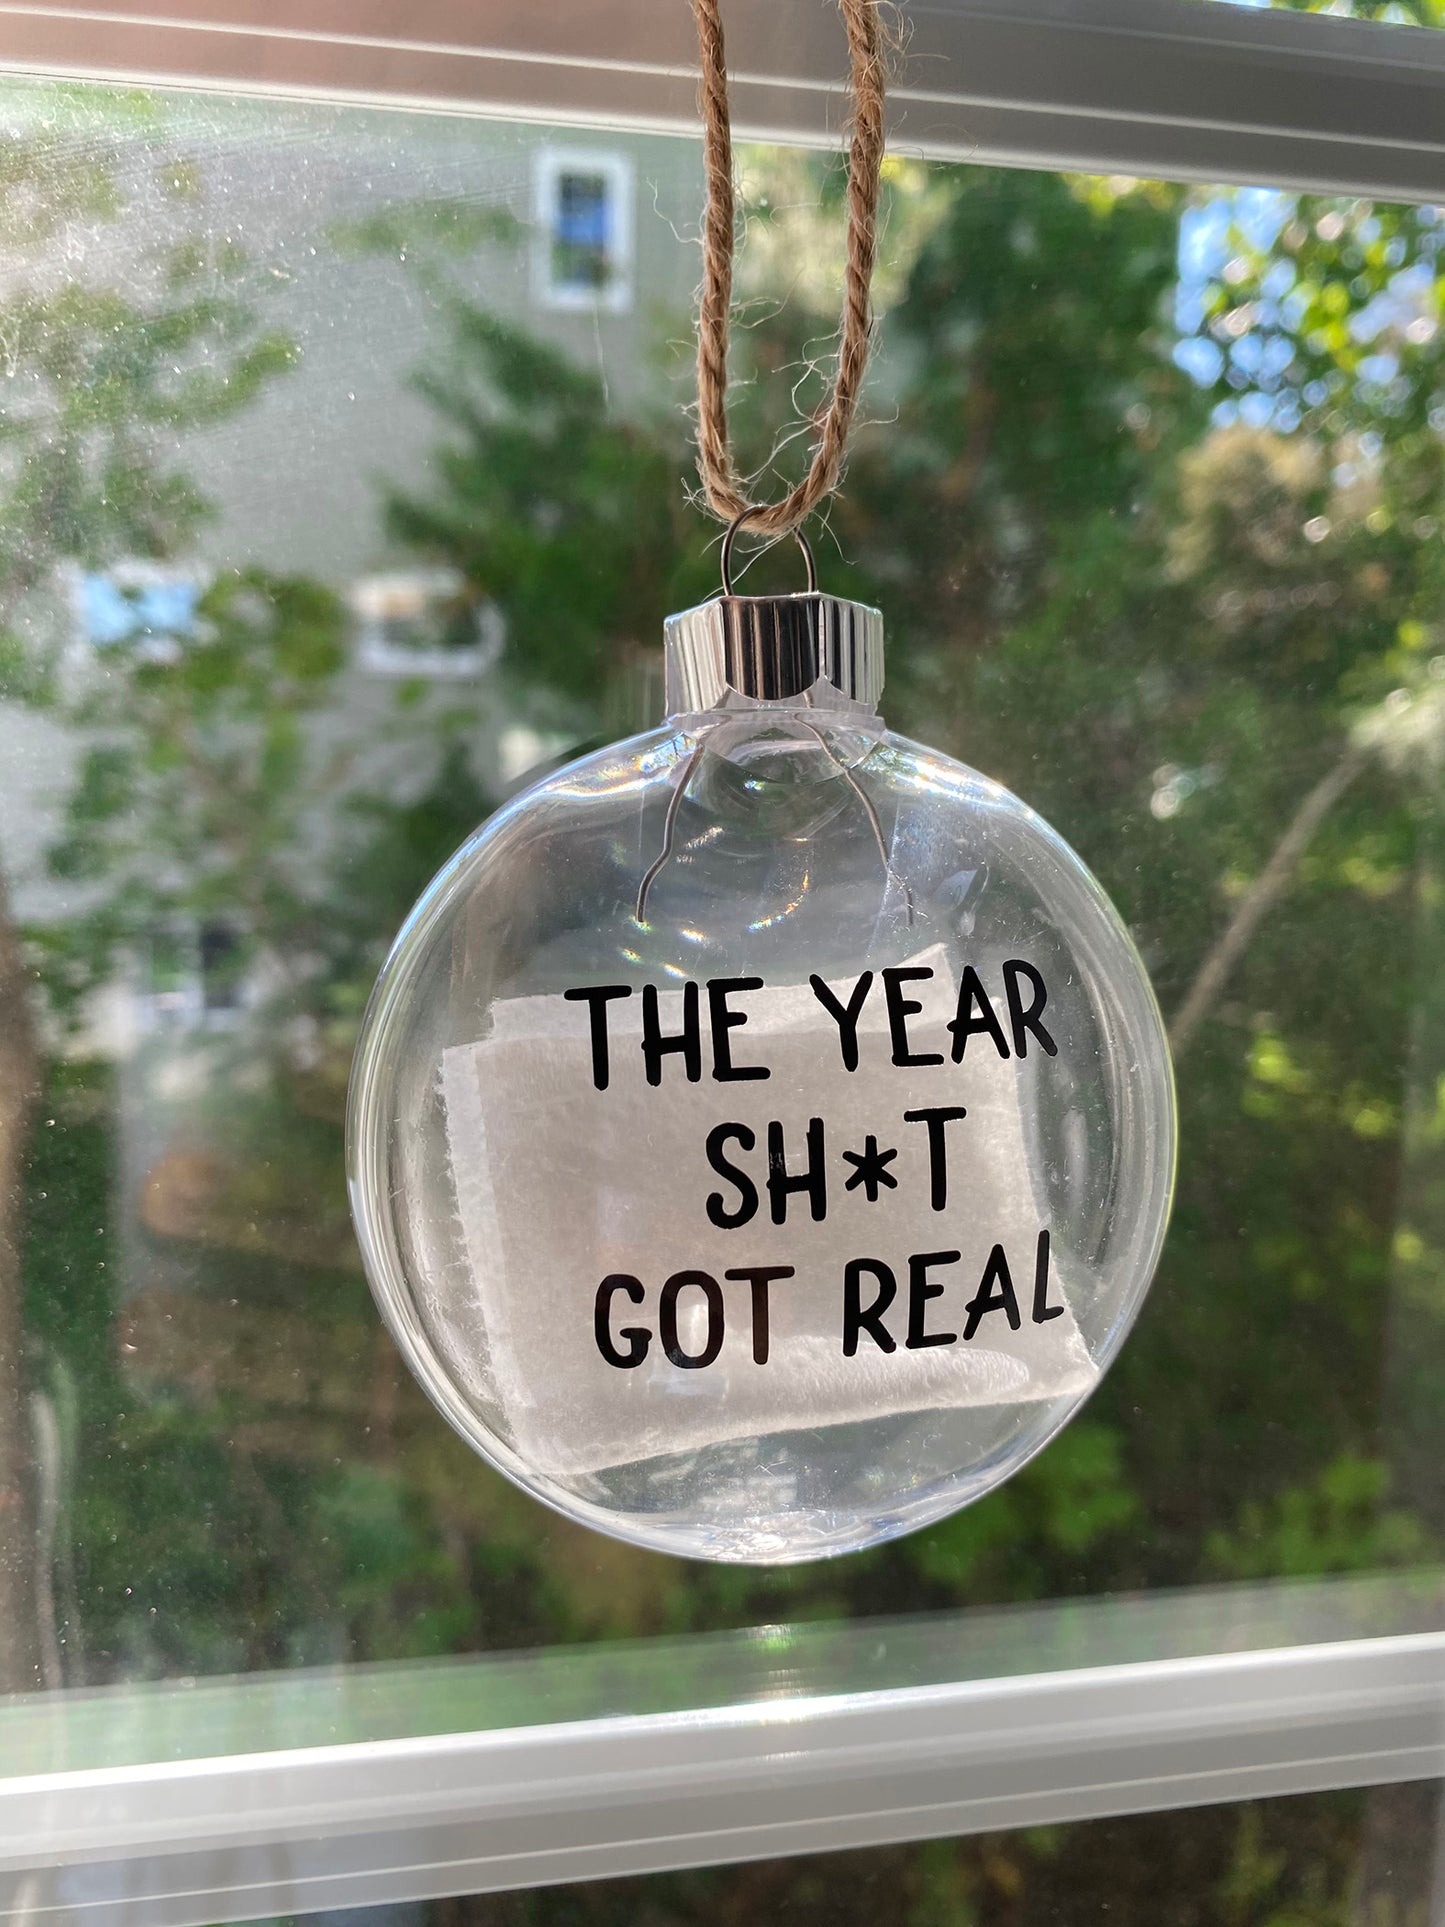 Funny Toilet Paper Ornament for 2020, Corona Times, Covid, The Year Sh*t Got Real, Can you Spare a Square, Gag Gift